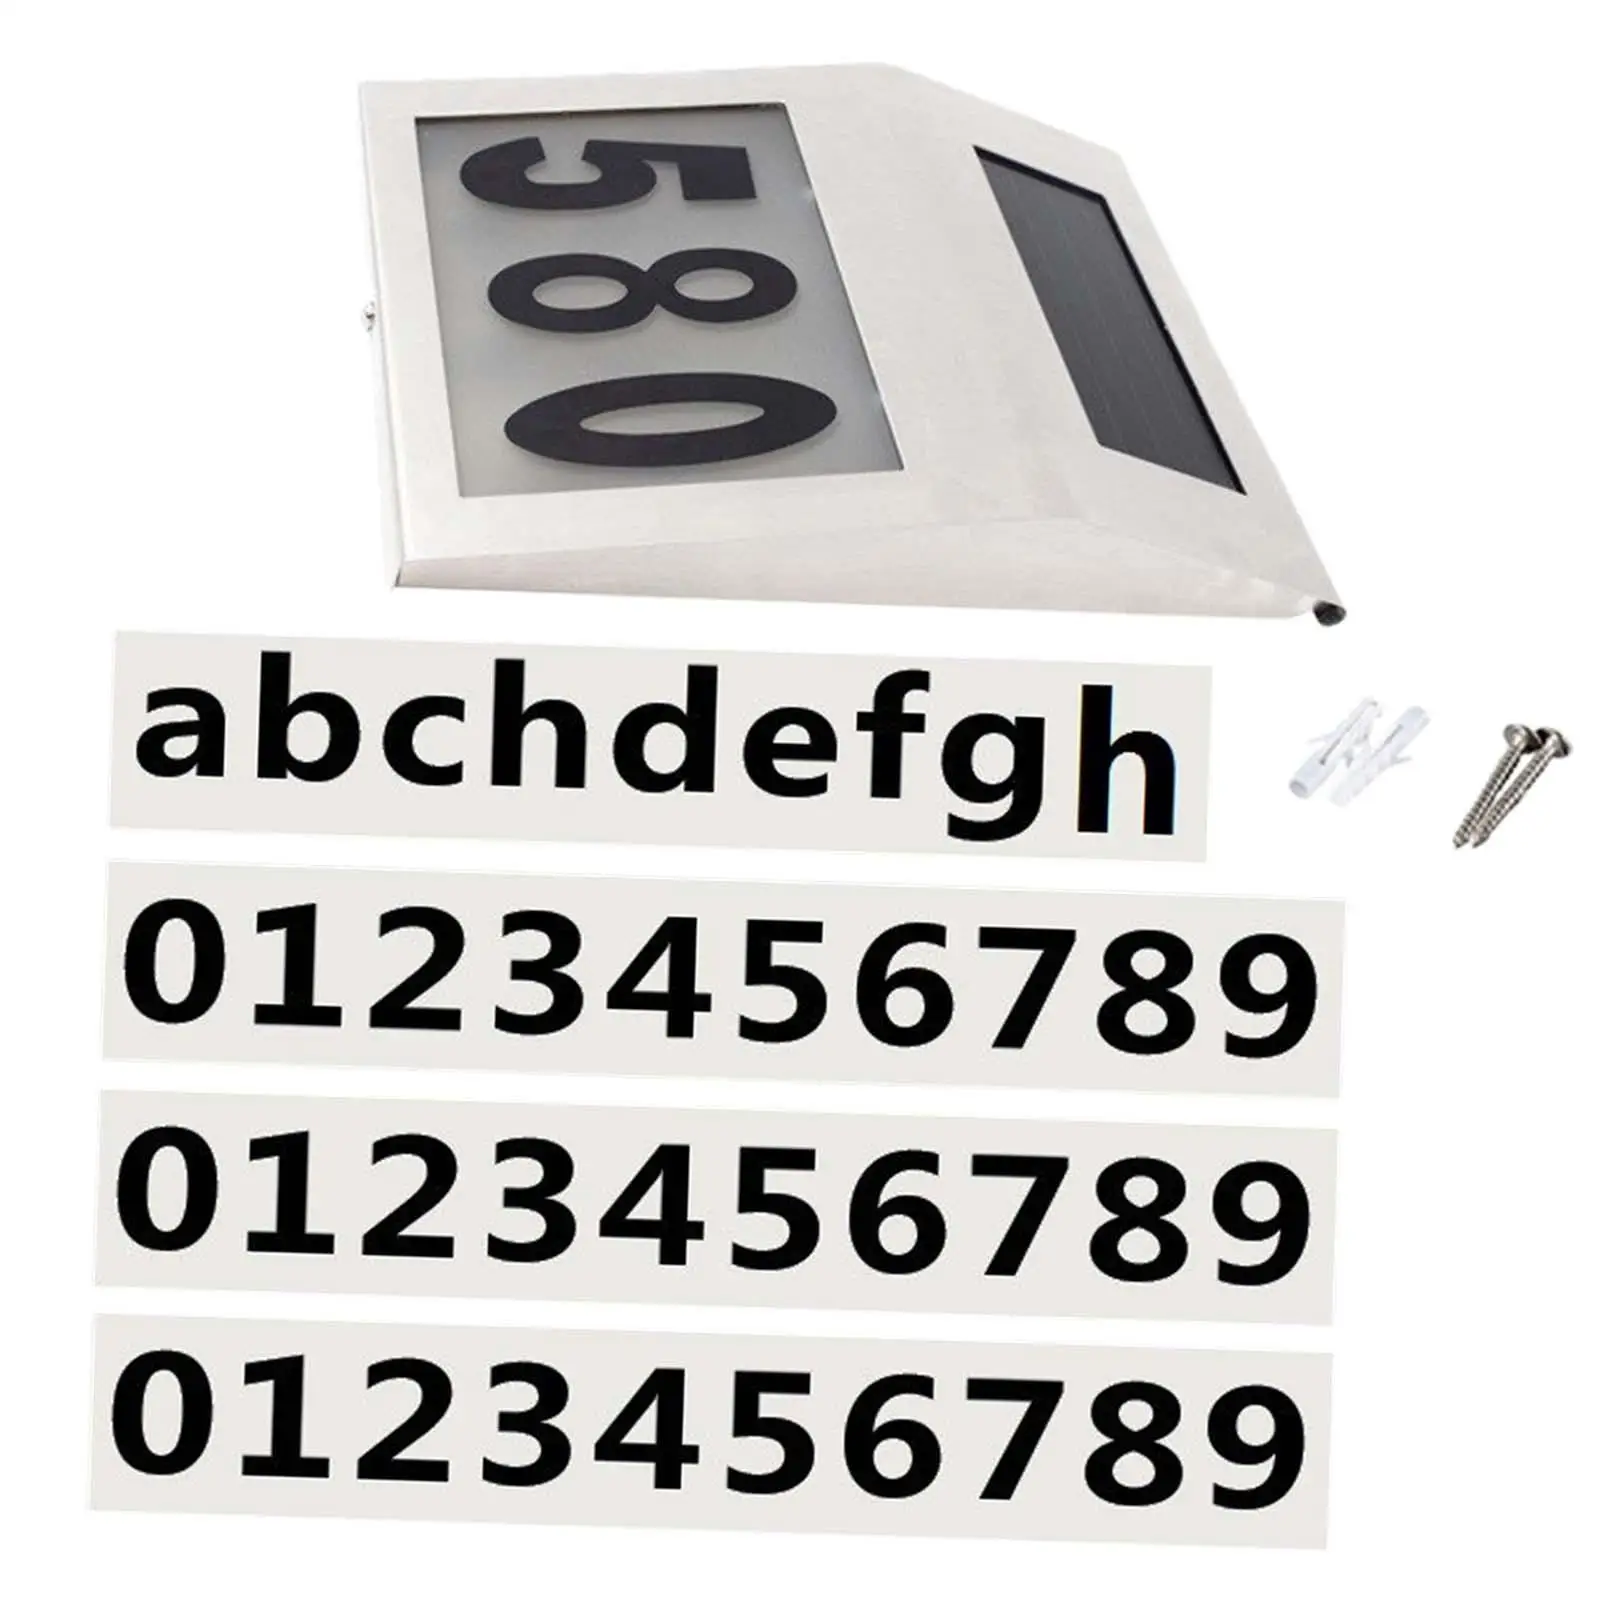 Solar House Number Sign Door Plate Wall Lights LED Illuminated Easy to Mount Wall Mounted for Home Outside Garden Yard Street